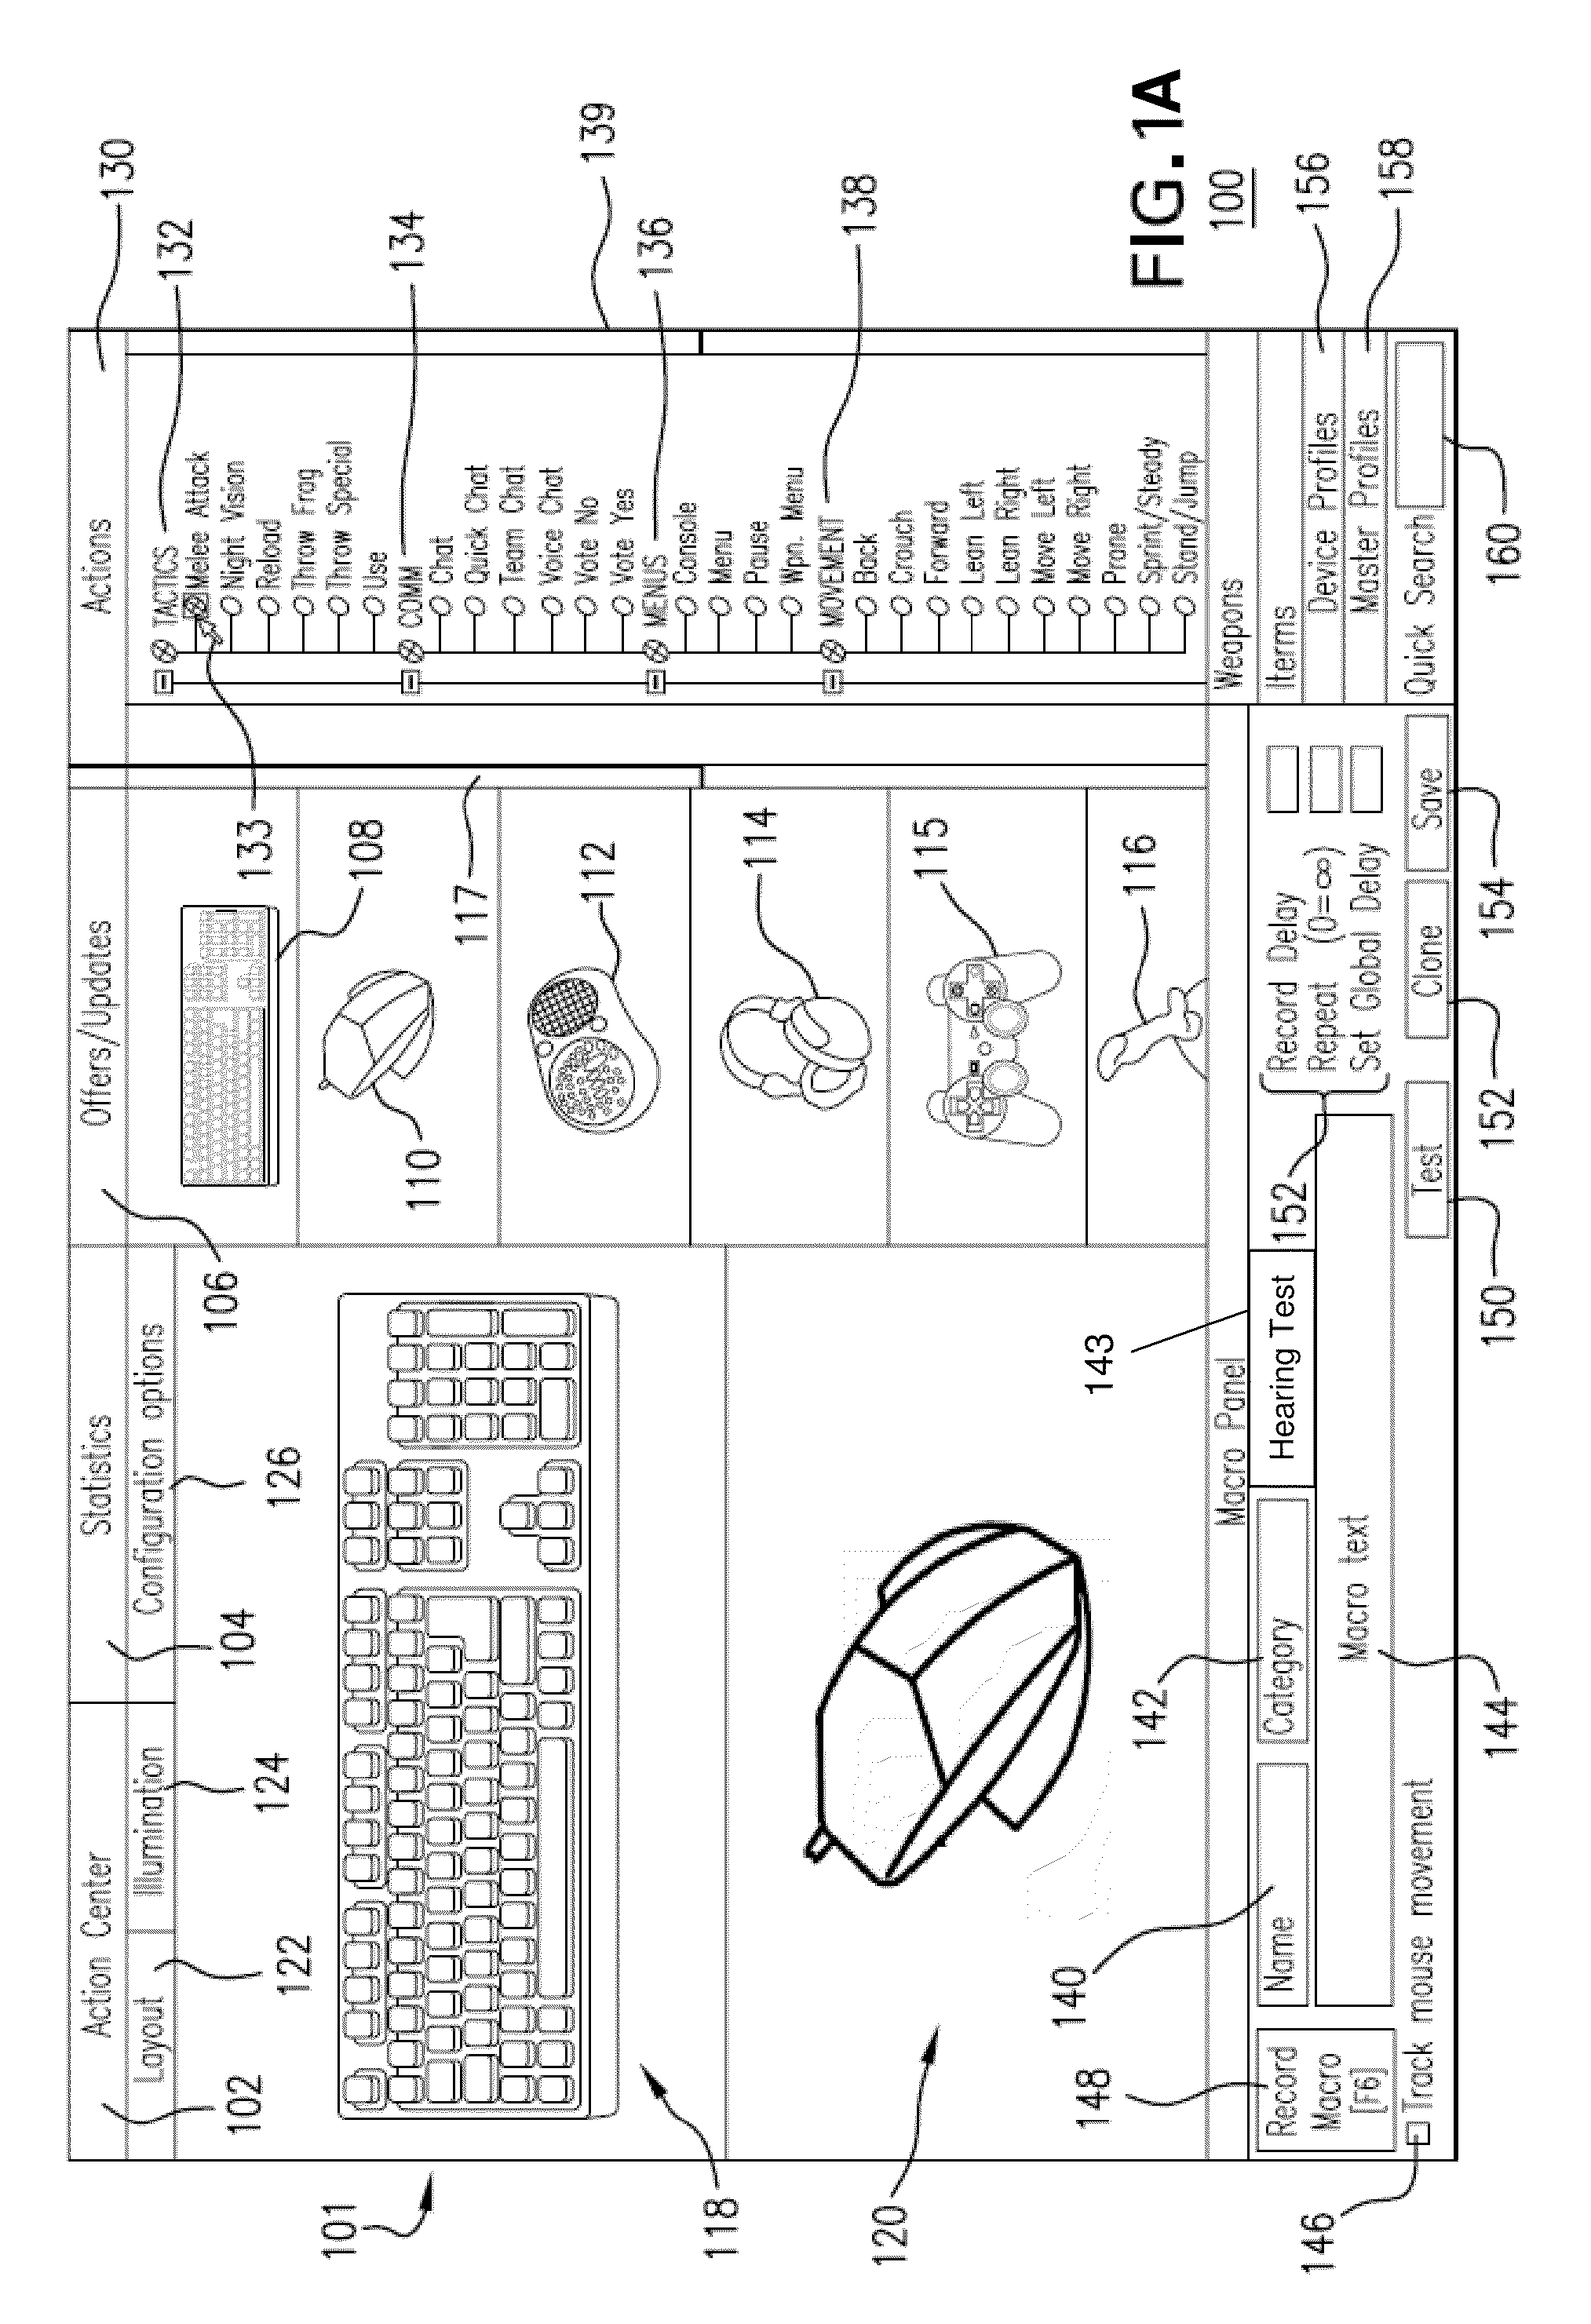 Apparatus and method for enhancing sound produced by a gaming application